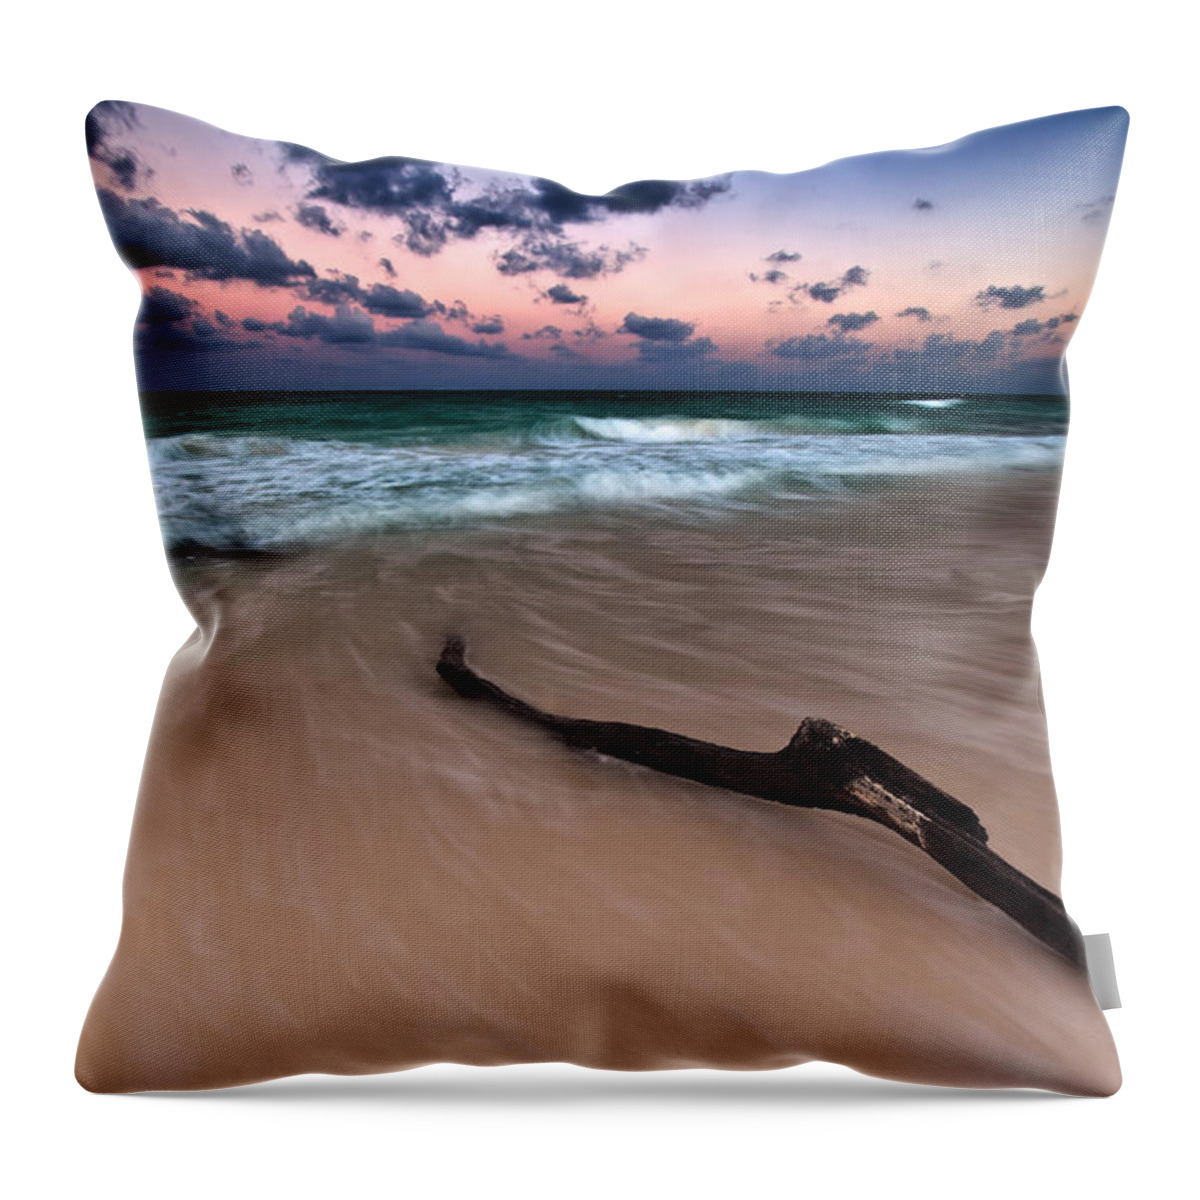 Sunset Throw Pillow featuring the photograph Caribbean Sunset by Mihai Andritoiu